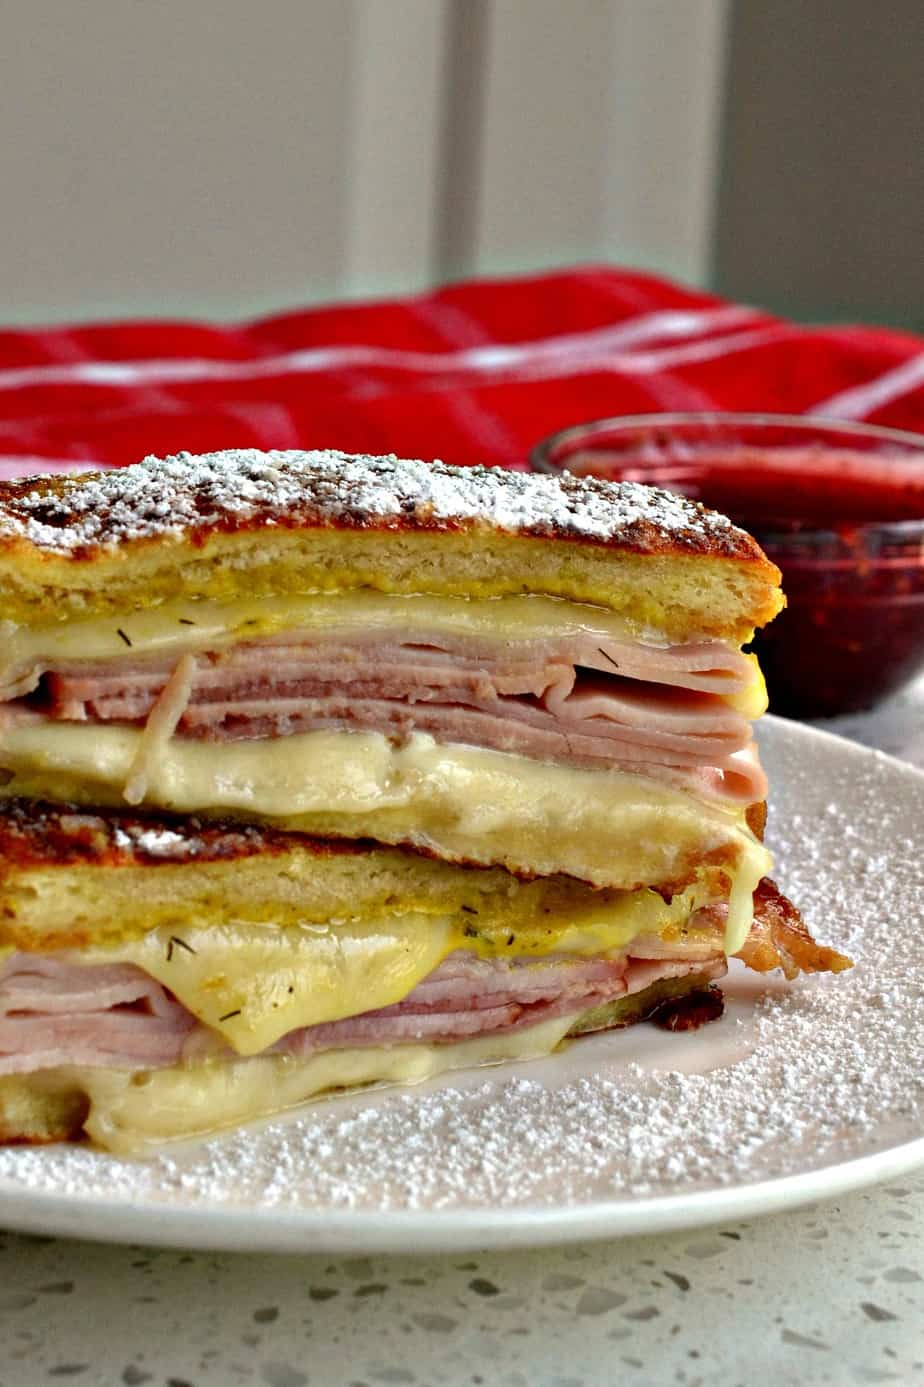 The Monte Cristo Sandwich is made with ham, turkey. Swiss Cheese and white bread that has been dipped in egg batter. 